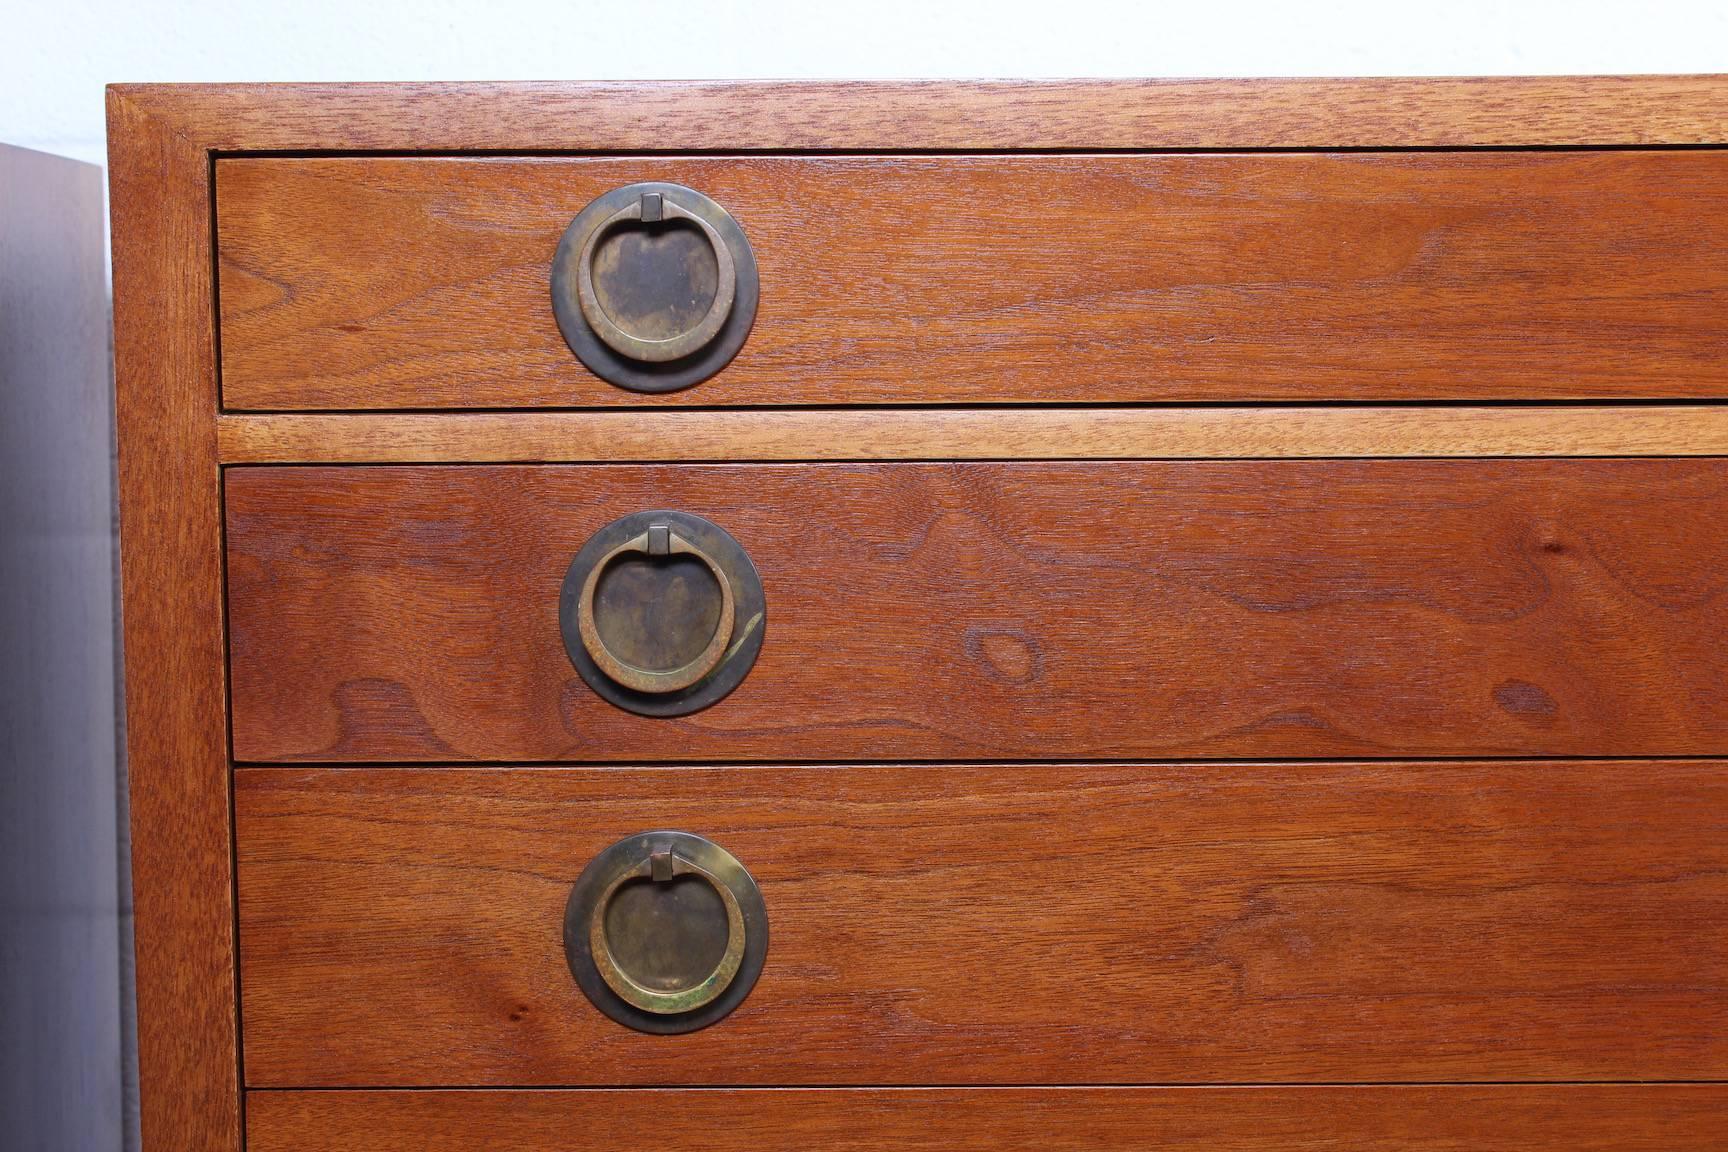 Pair of Chests by Edward Wormley for Dunbar 1